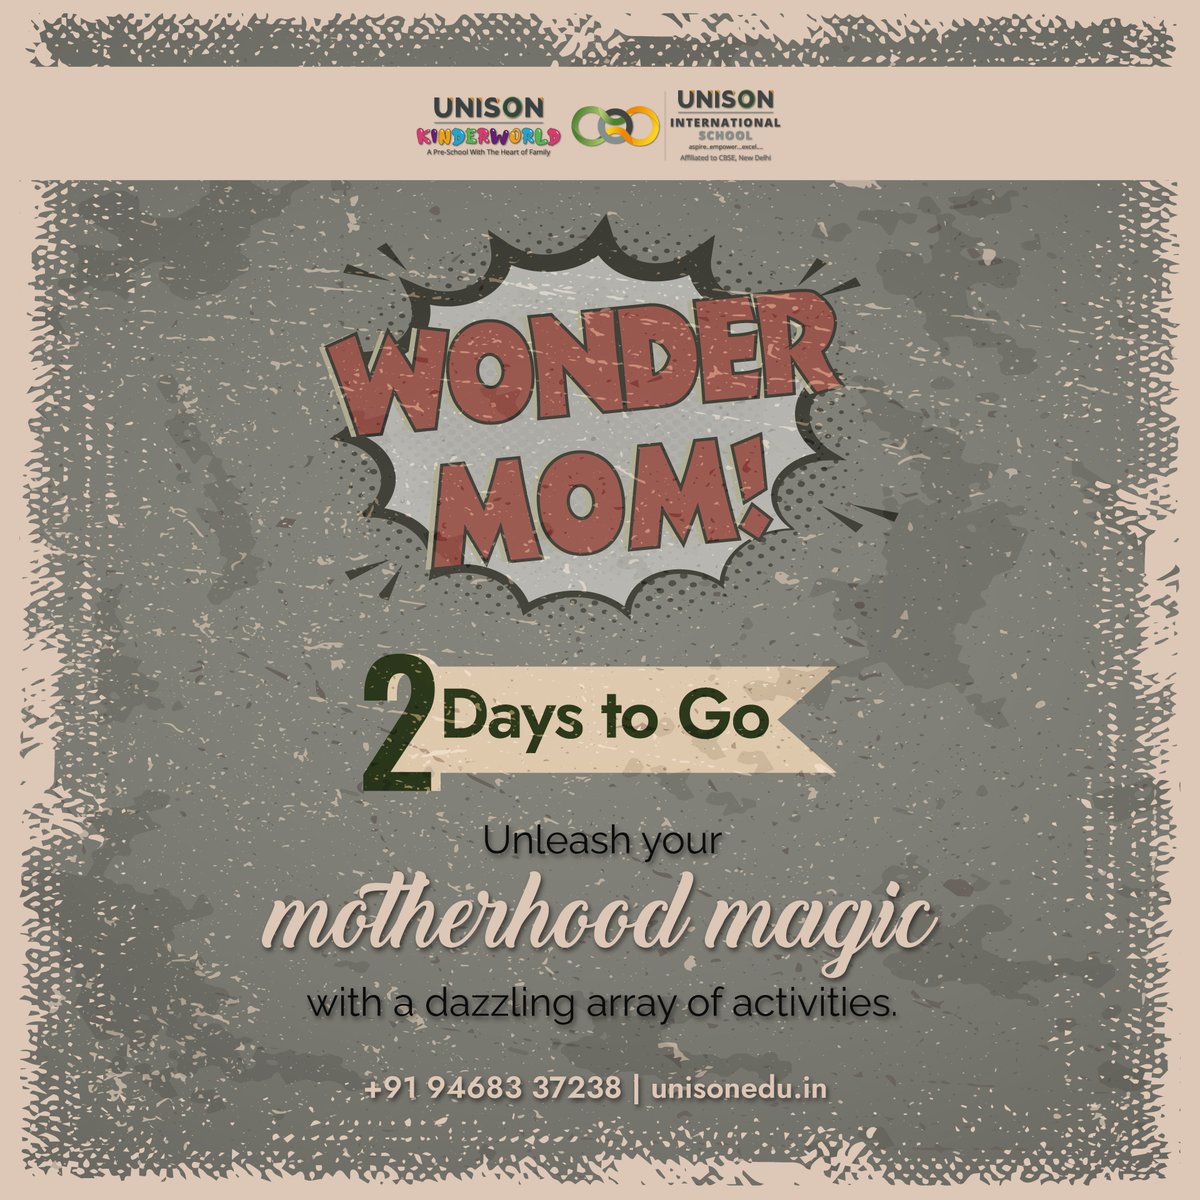 Let's honour the Wonder Moms in our lives and valuing the special bond of love and selflessness ✨ 

Only 2 days left! 

#CelebrateMotherhood #UnisonInternationalSchool #Excellence #Academics #ExtracurricularActivities #FutureLeaders #CBSESchool #21stCenturyCurriculum